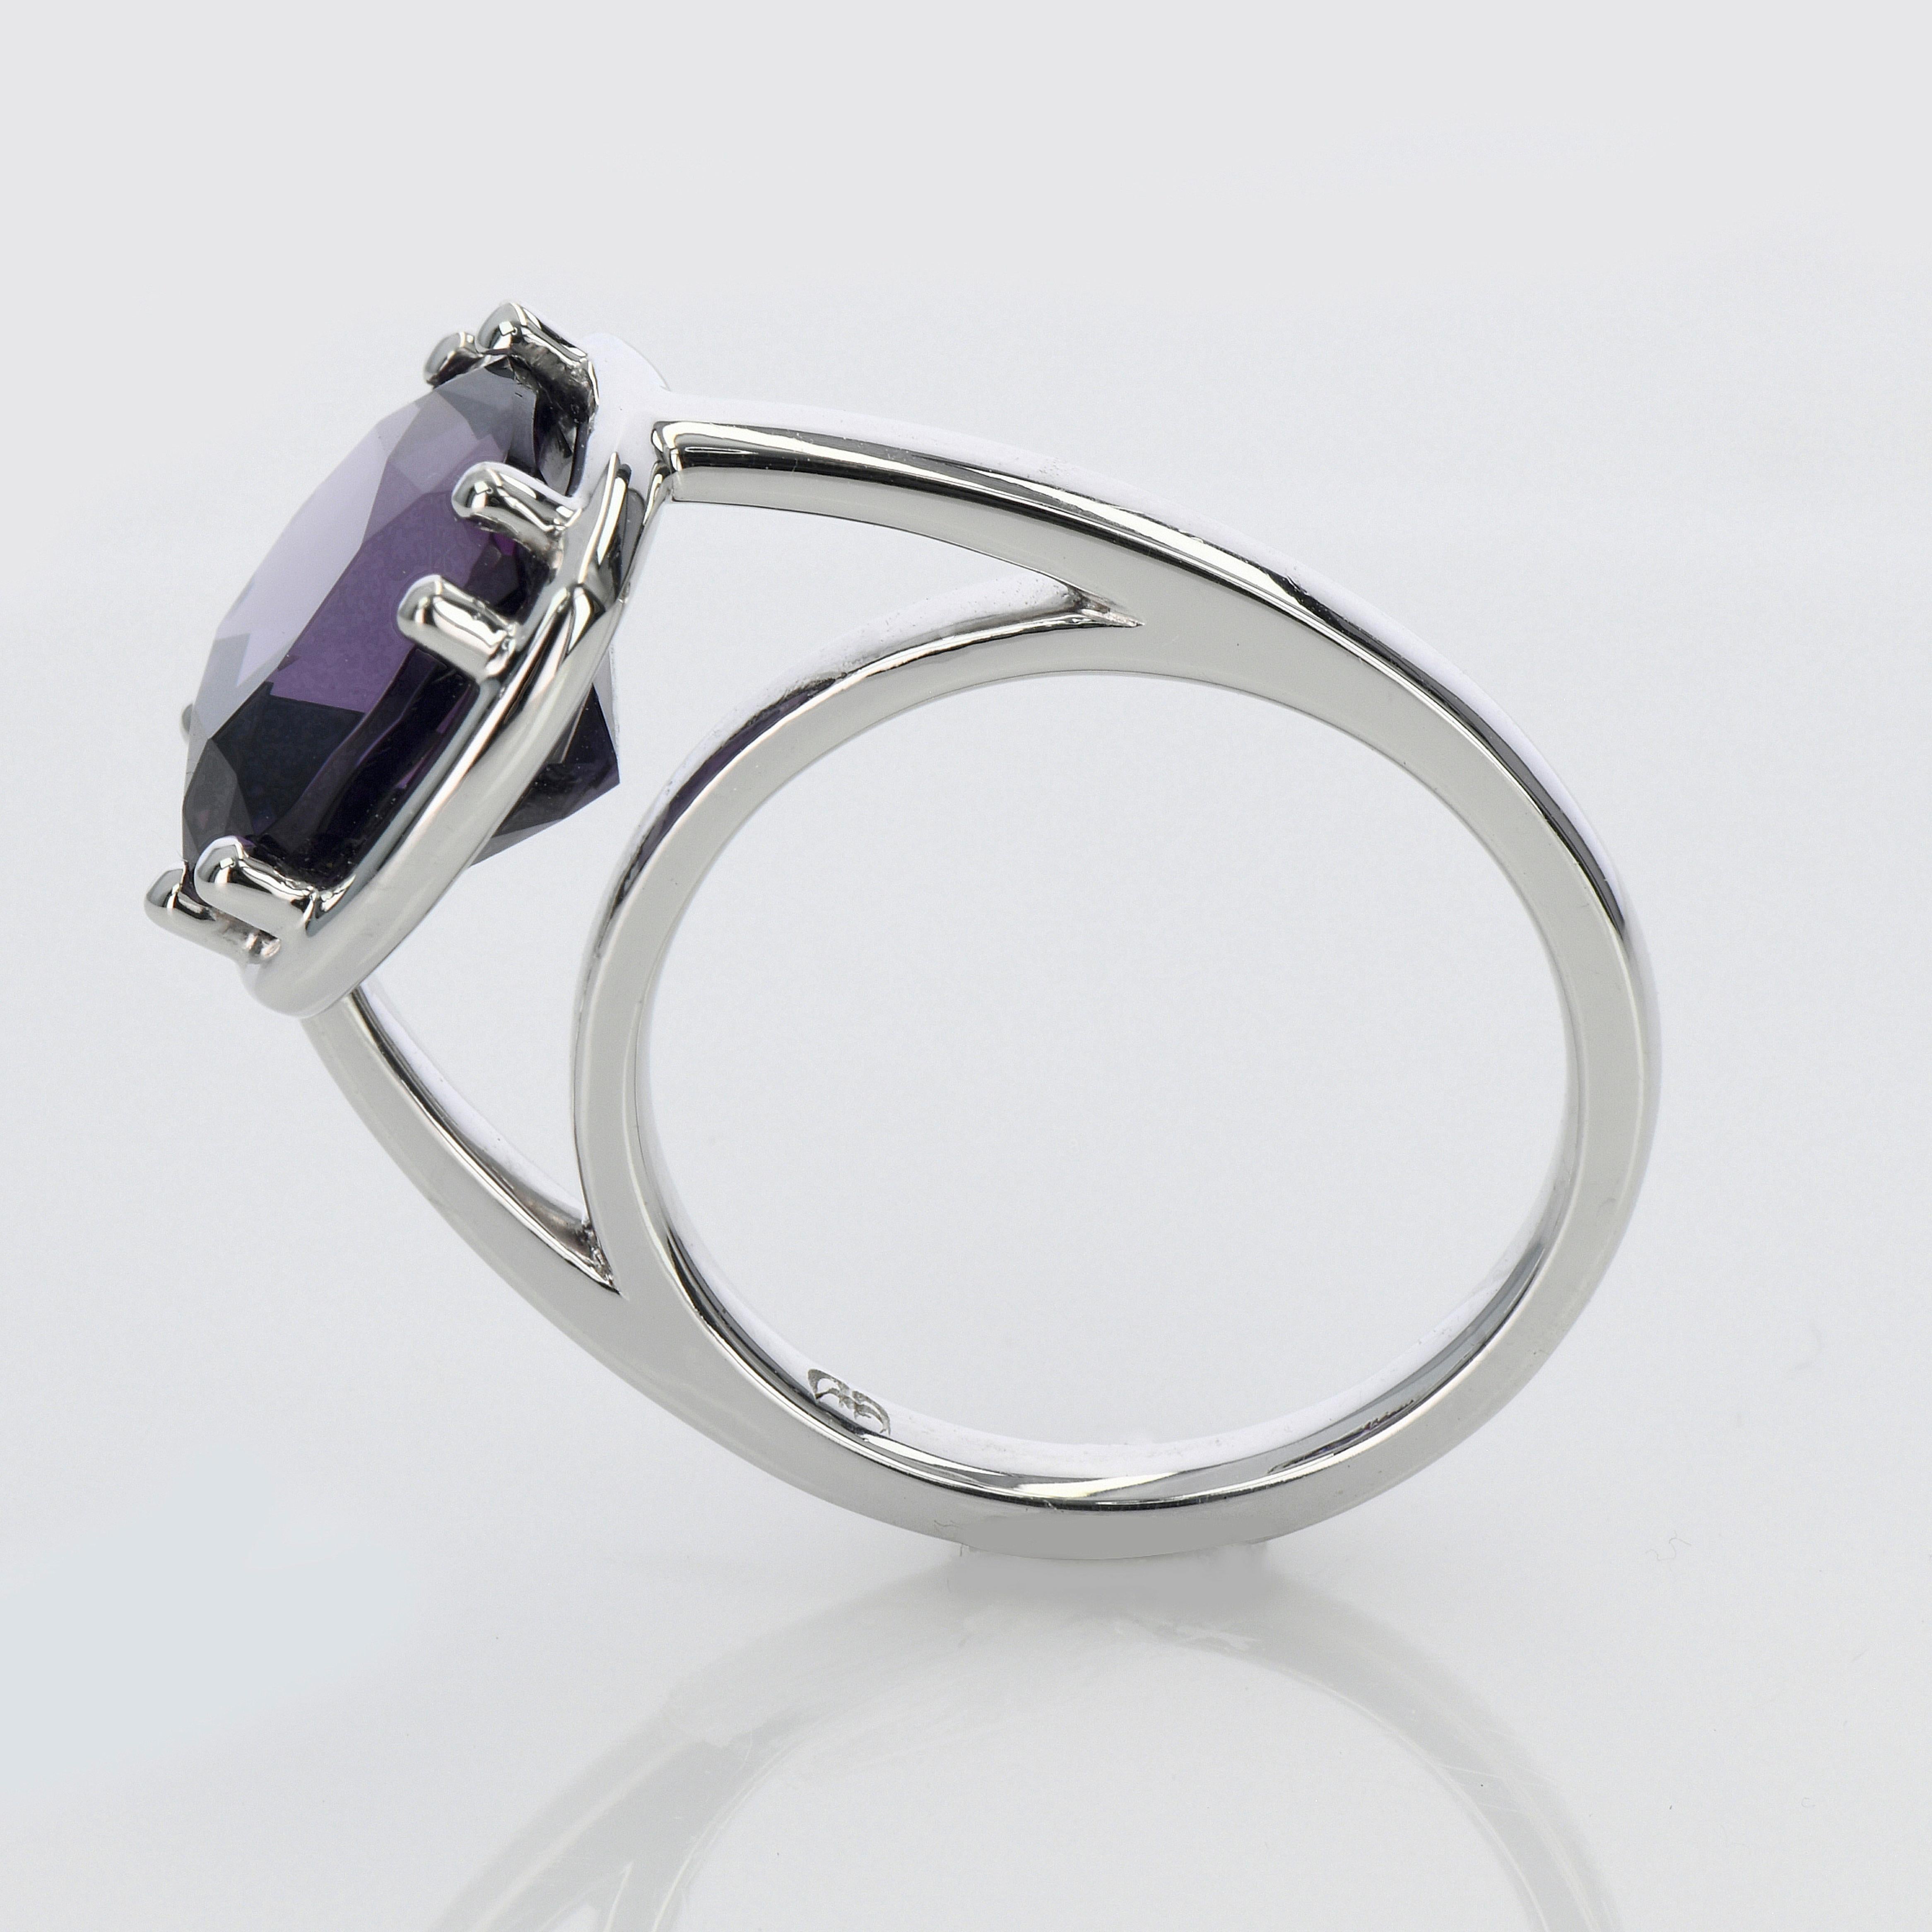 Purple Spinel Ring
Creator: Carson Gray Jewels
Ring Size: 5
Metal: 18KT White Gold
Stone: Purple Spinel
Stone Cut: Cushion
Weight: 4.89 Carats
Style: Statement Ring
Place of Origin: Tanzania
Period: Modern
Date of Manufacture (circa): November 2023